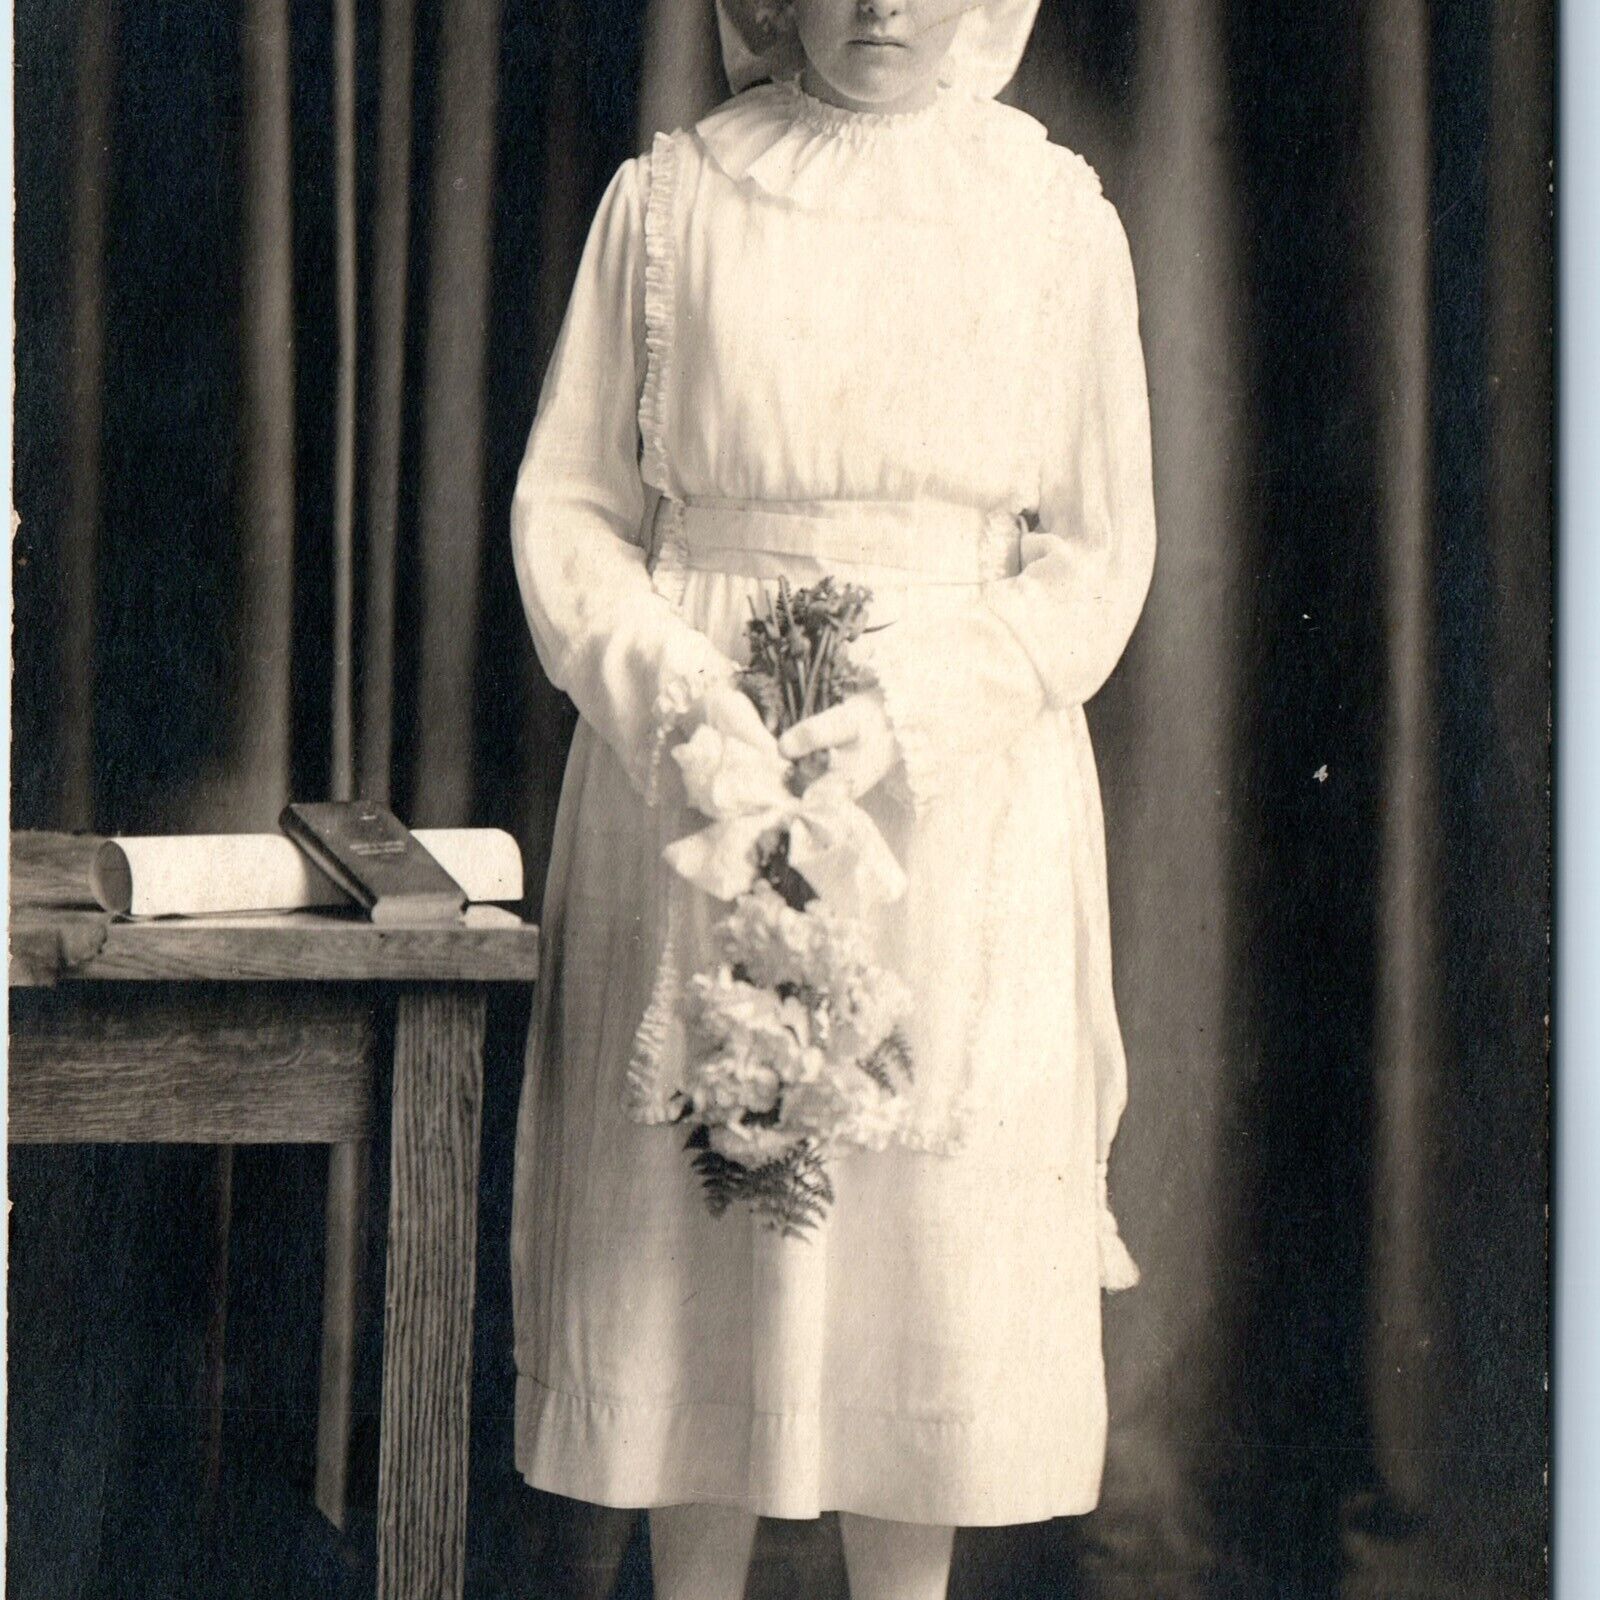 ID'd c1910s Masculine Short Hair Young Lady RPPC Confirmation Real Photo PC A123